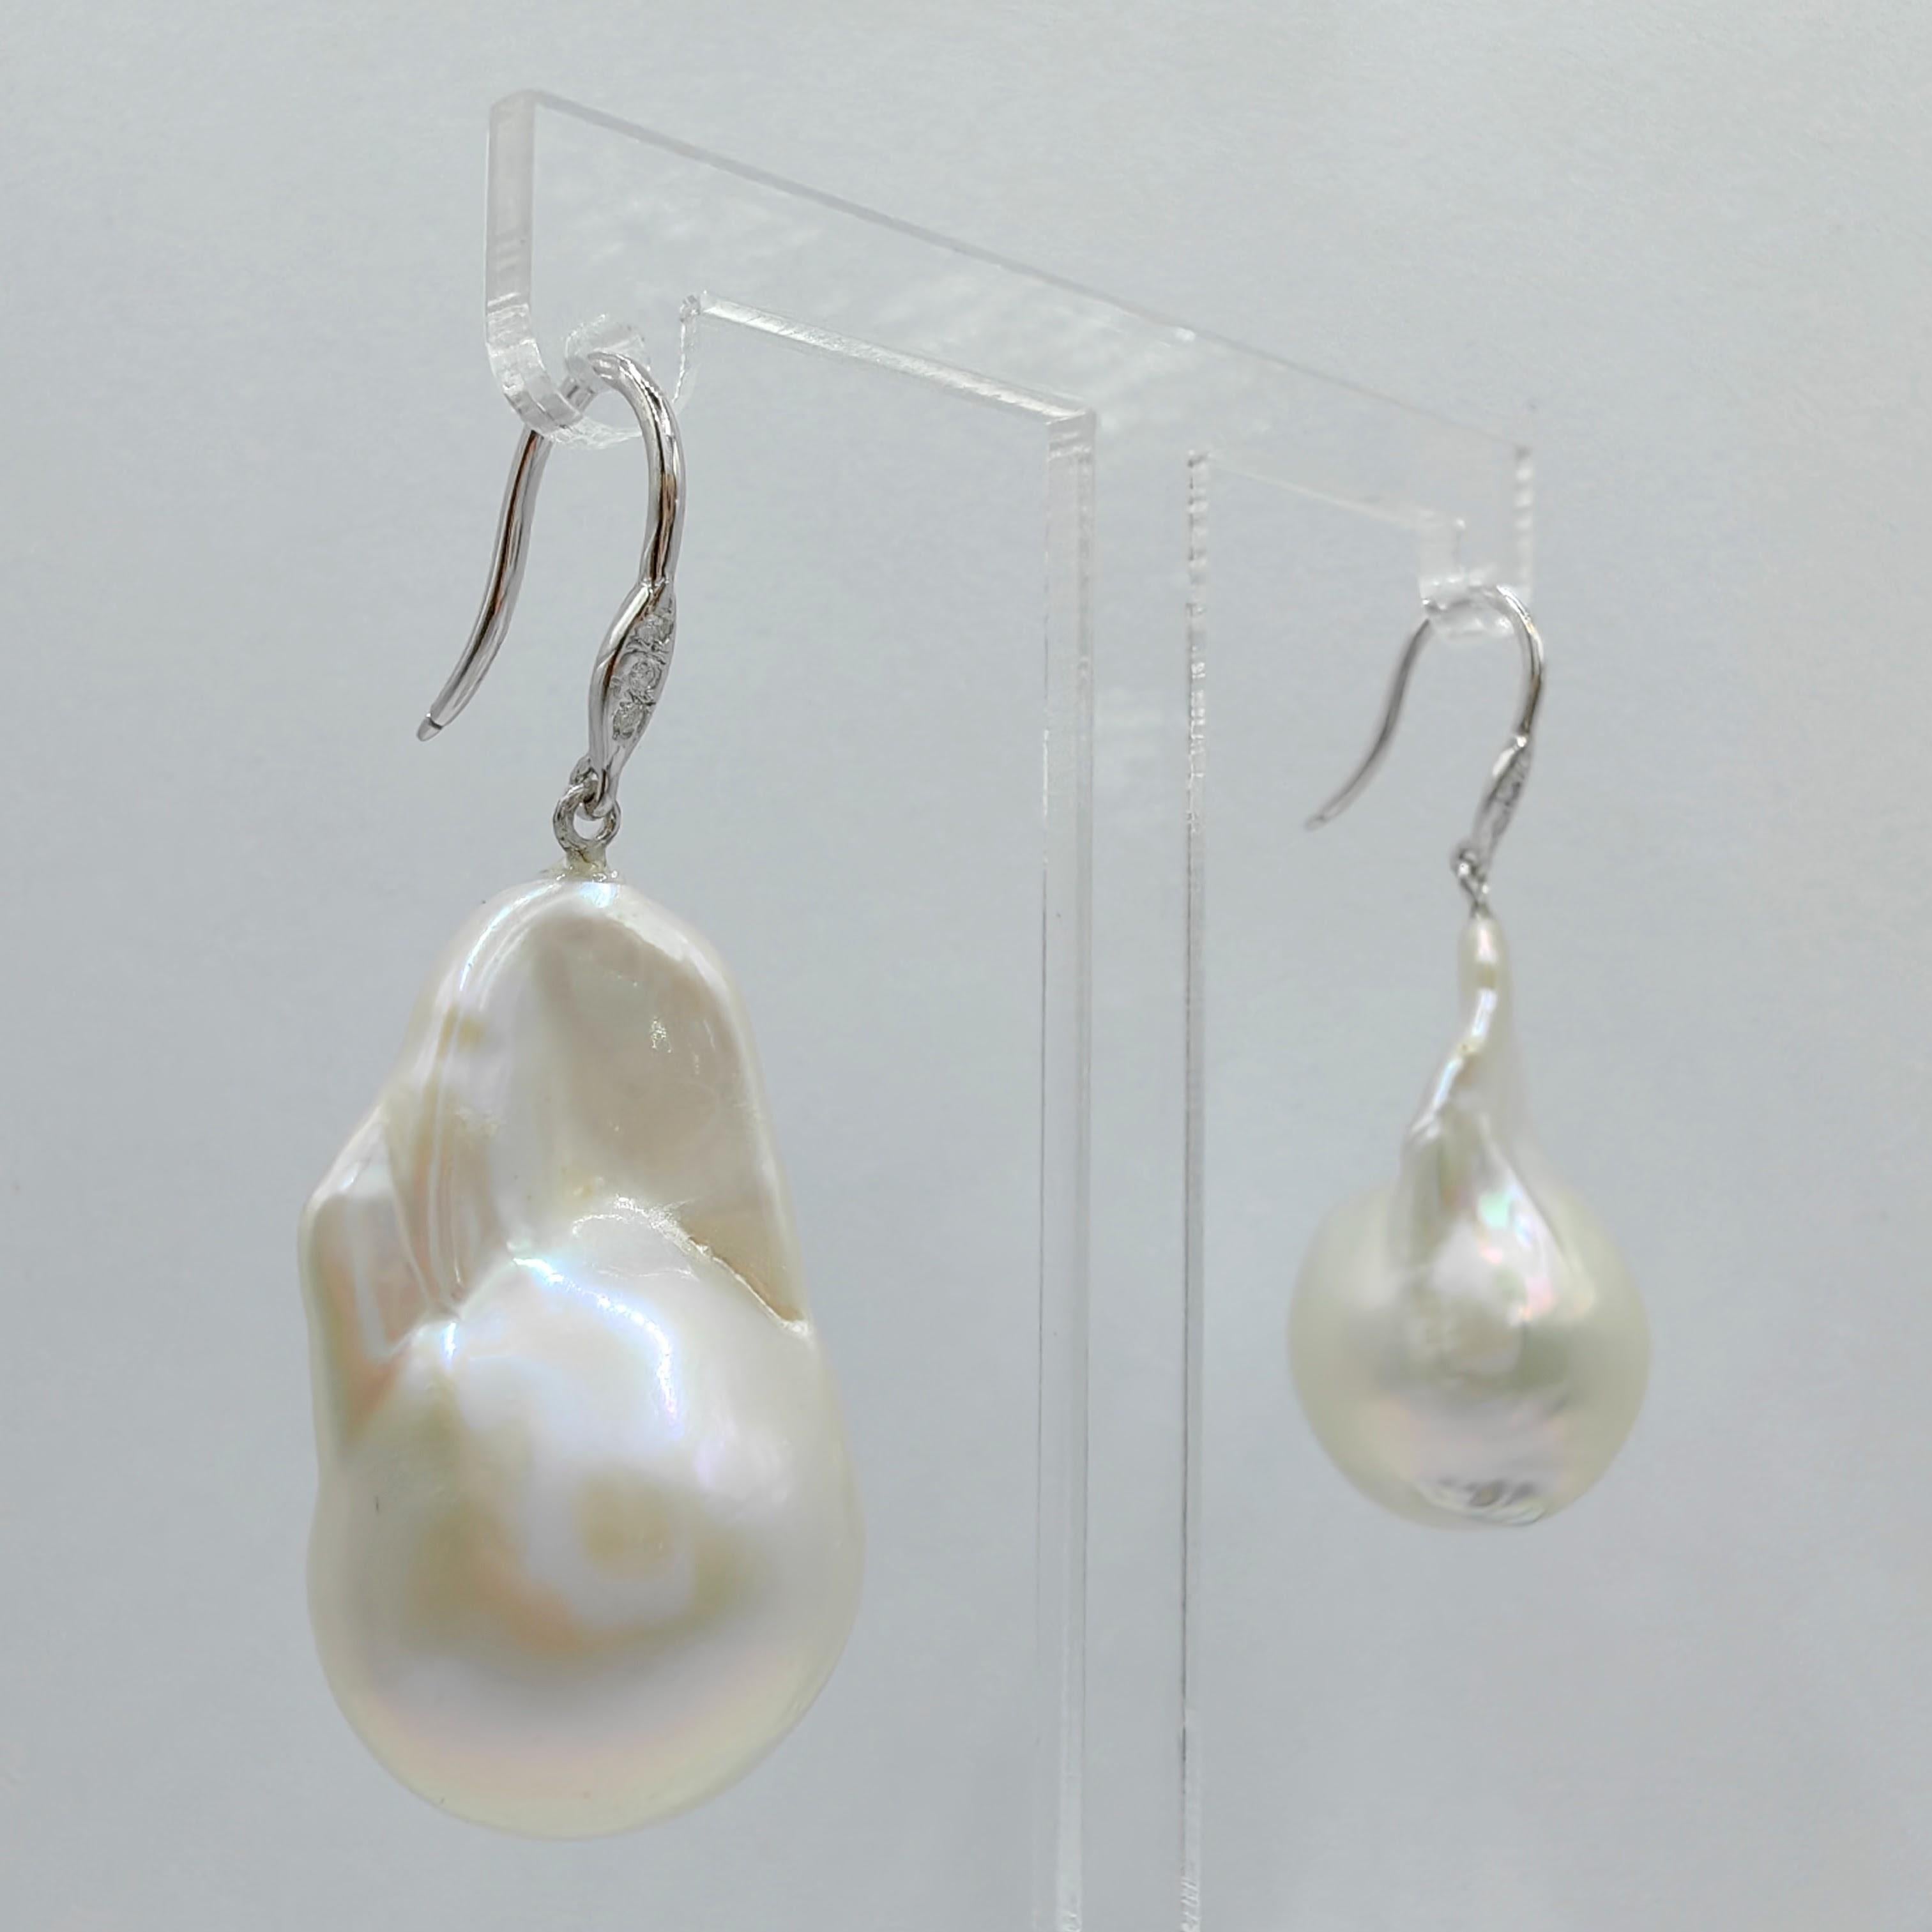 Uncut Baroque Pearl Diamond Dangling Drop Earrings With 18K White Gold French Hooks For Sale